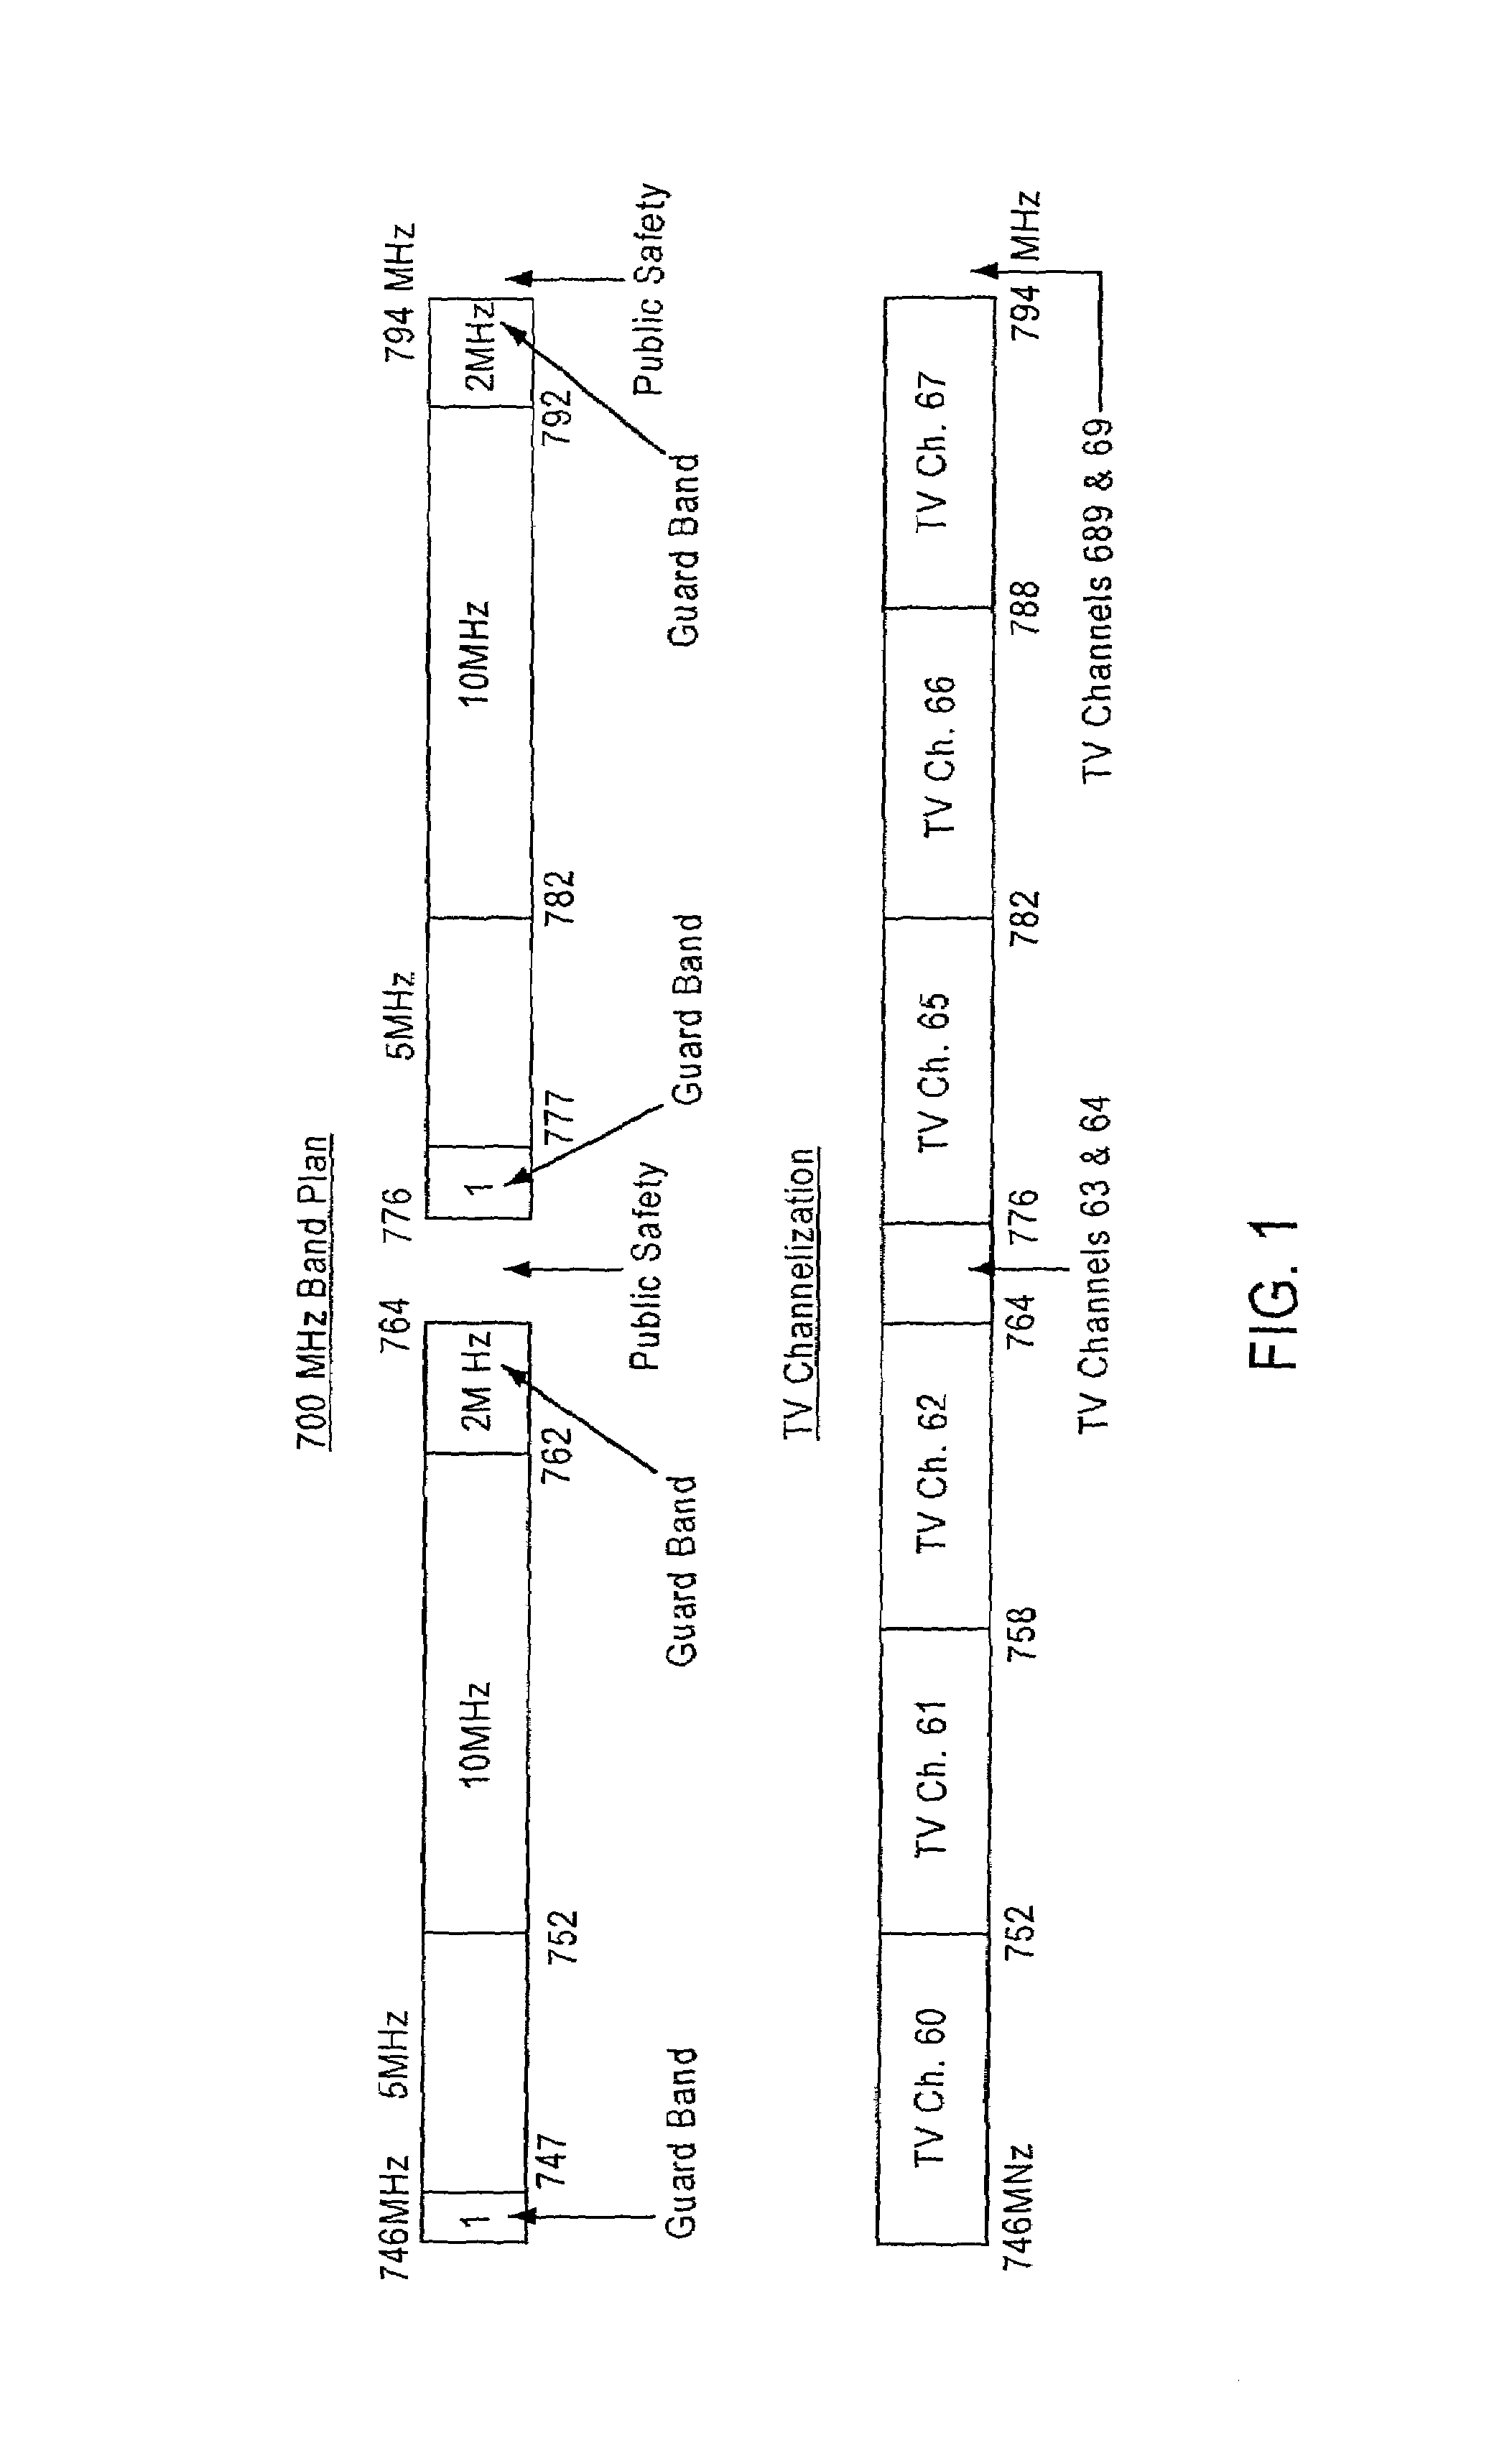 Methods and apparatus for utilizing radio frequency spectrum simultaneously and concurrently in the presence of co-channel and/or adjacent channel television signals by adjusting transmitter power or receiver sensitivity